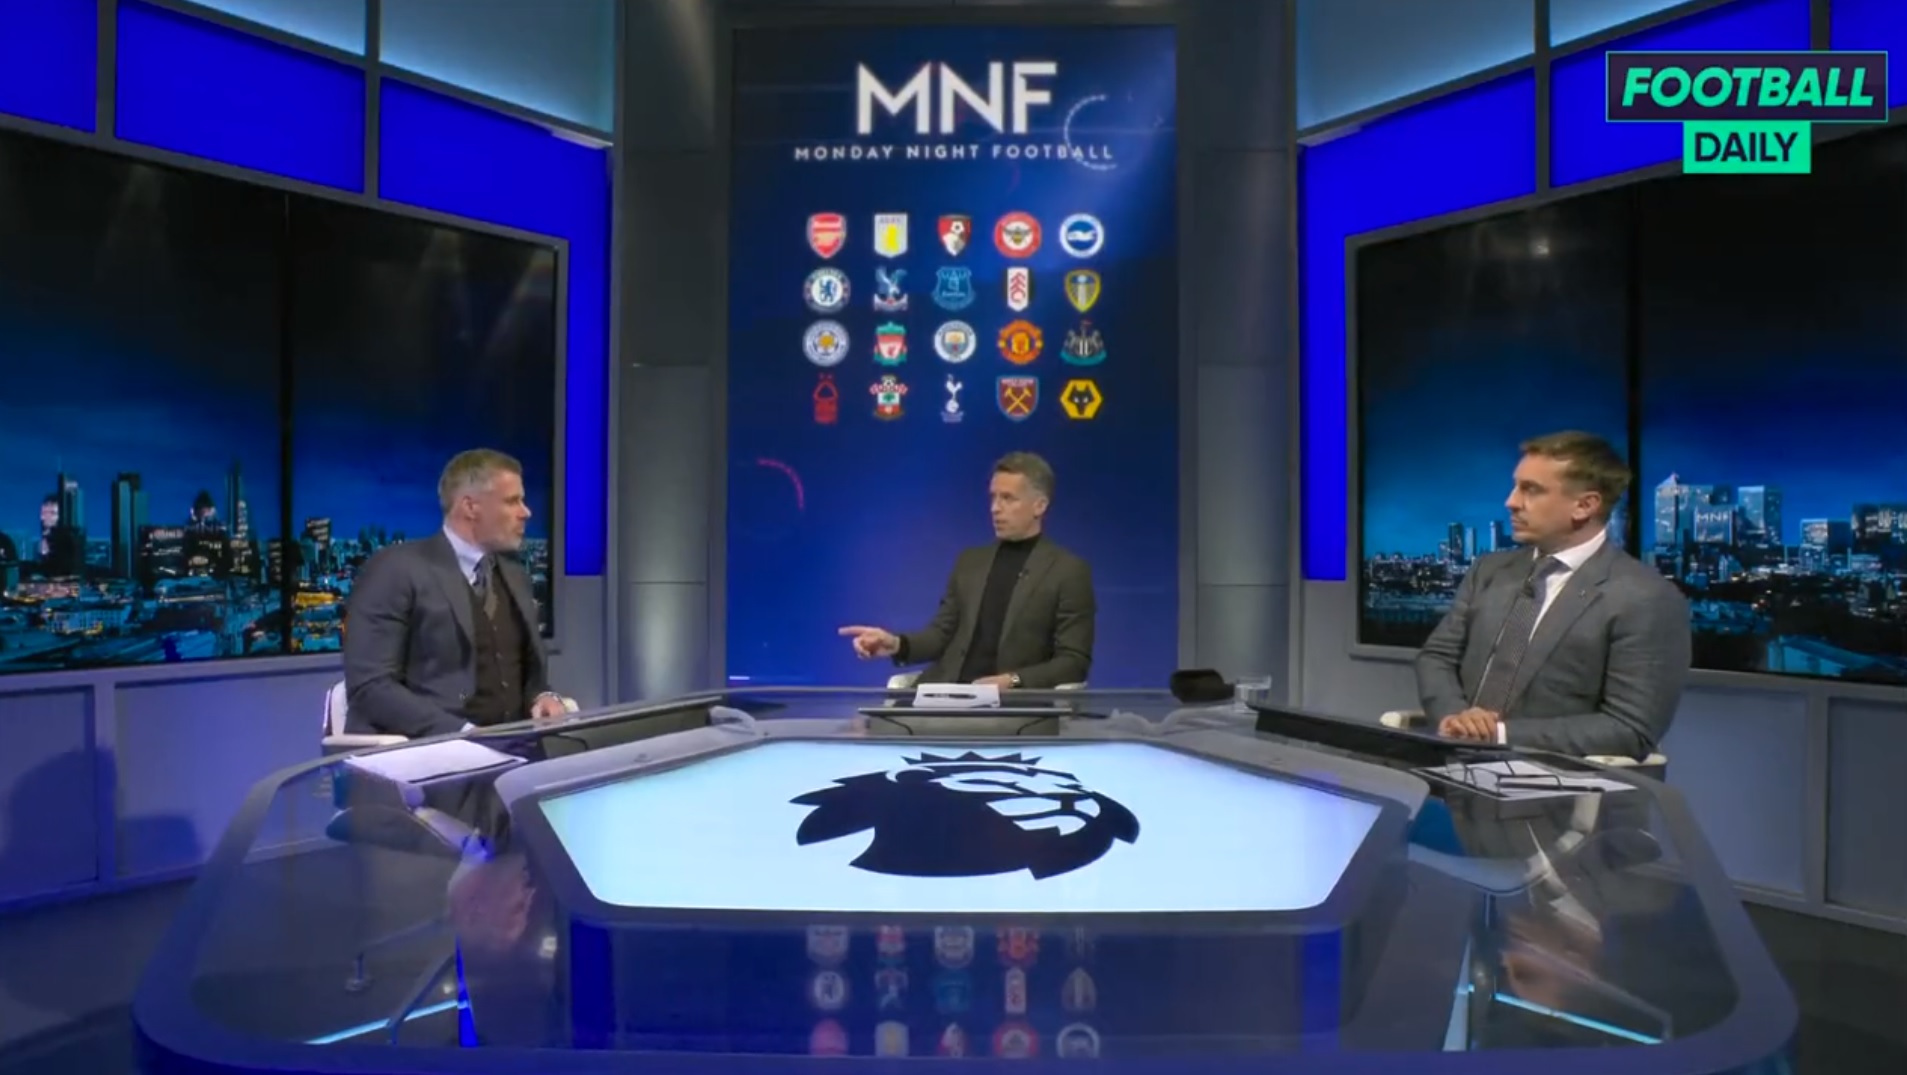 Gary Neville and Carragher had the same Liverpool opinion last night; Man Utd divides them